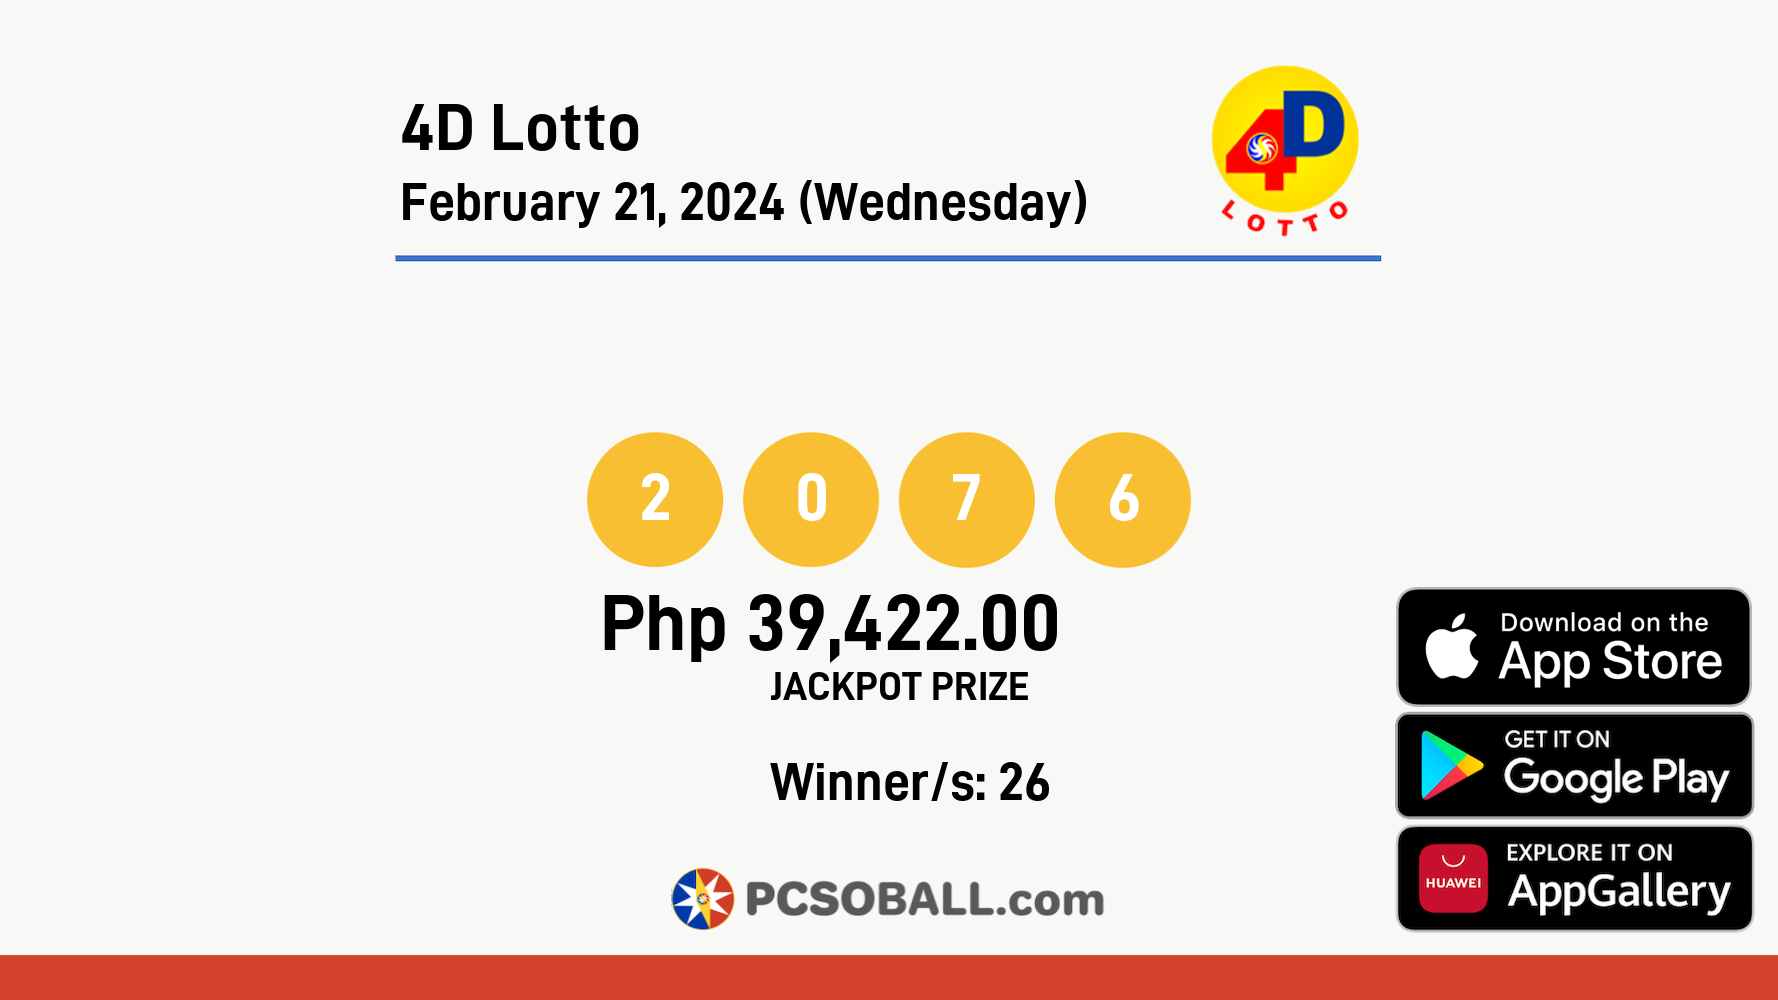 4D Lotto February 21, 2024 (Wednesday) Result